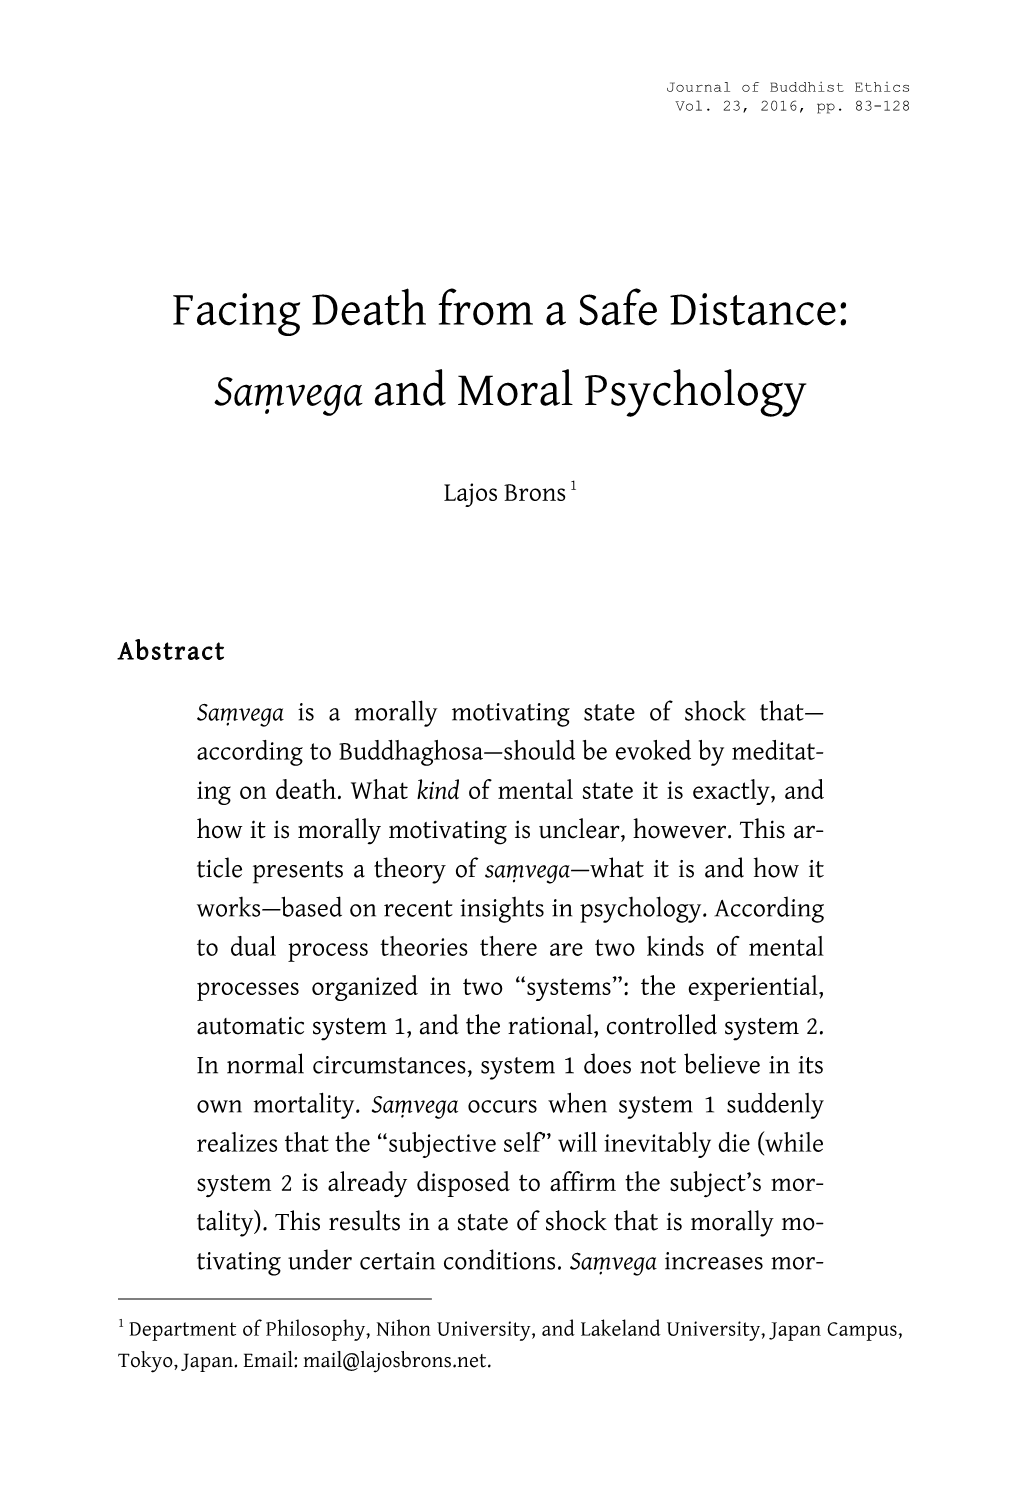 Facing Death from a Safe Distance: Saṃvega and Moral Psychology